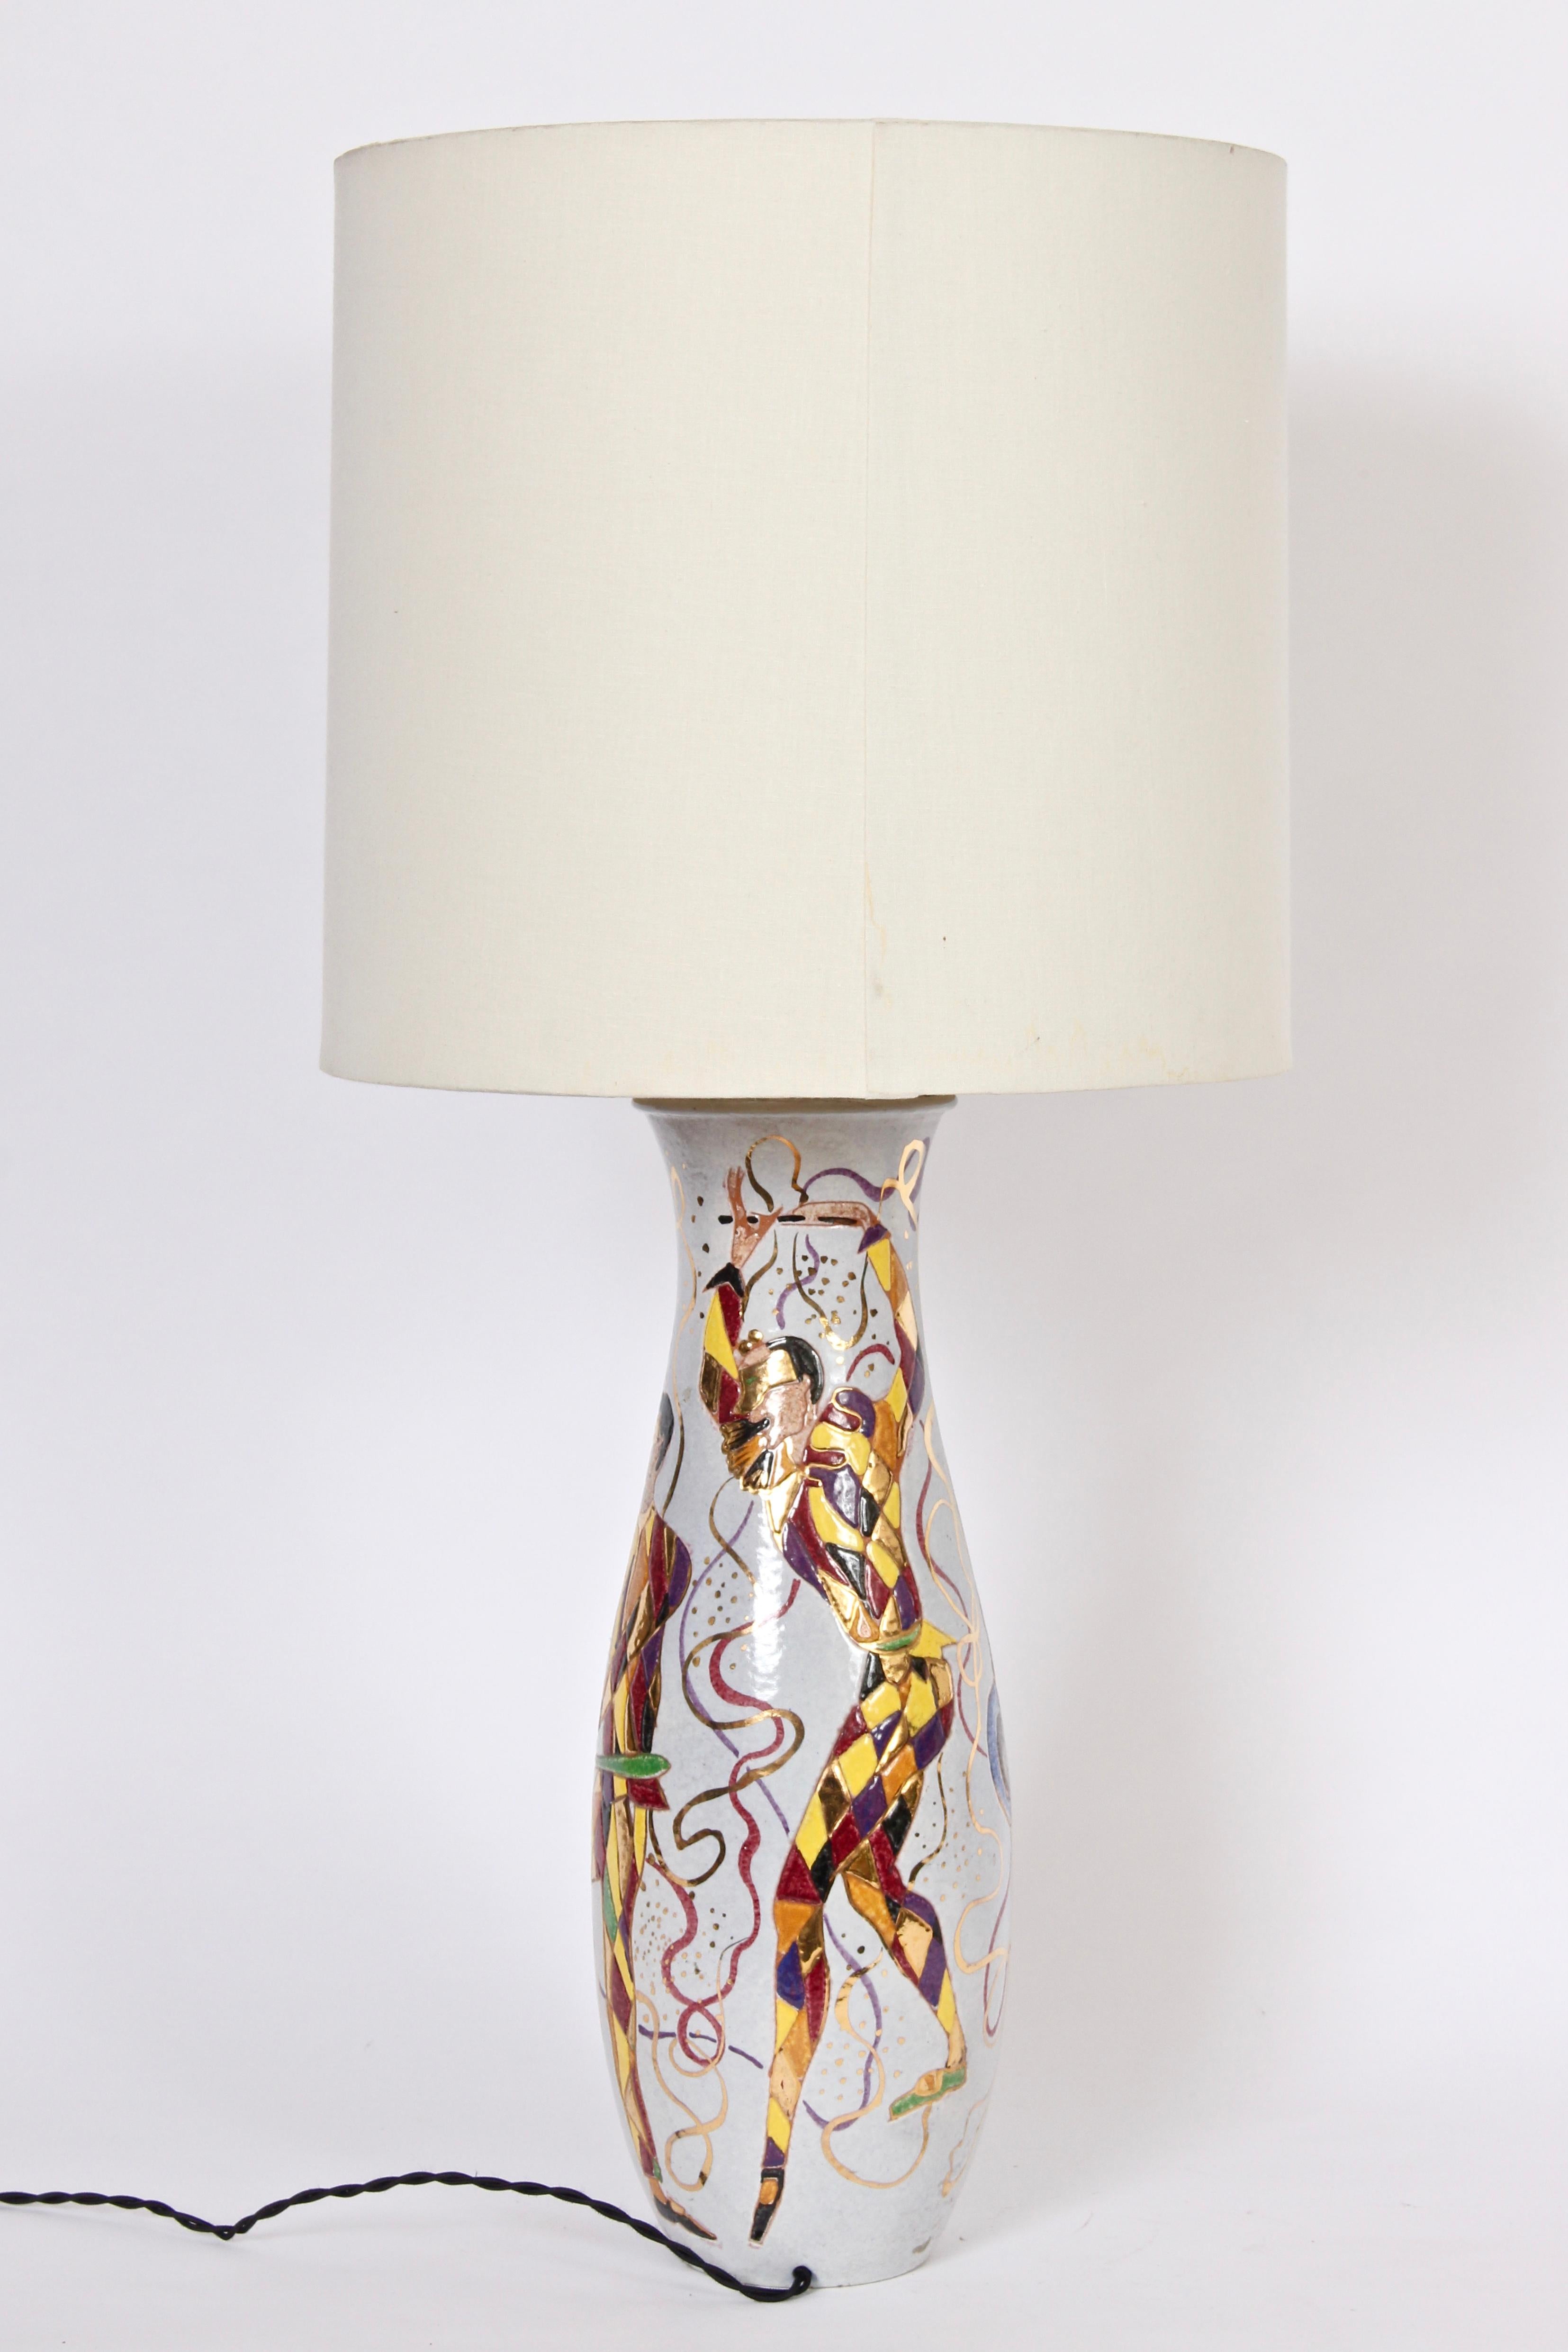 Tall Marcello Fantoni bright Masquerade glazed ceramic Table Lamp, circa 1950. Featuring a reflective white background and hand painted textured ribboned, masked, dancing, harlequins in green, yellow, gold copper, red & maroon. 22 H to top of